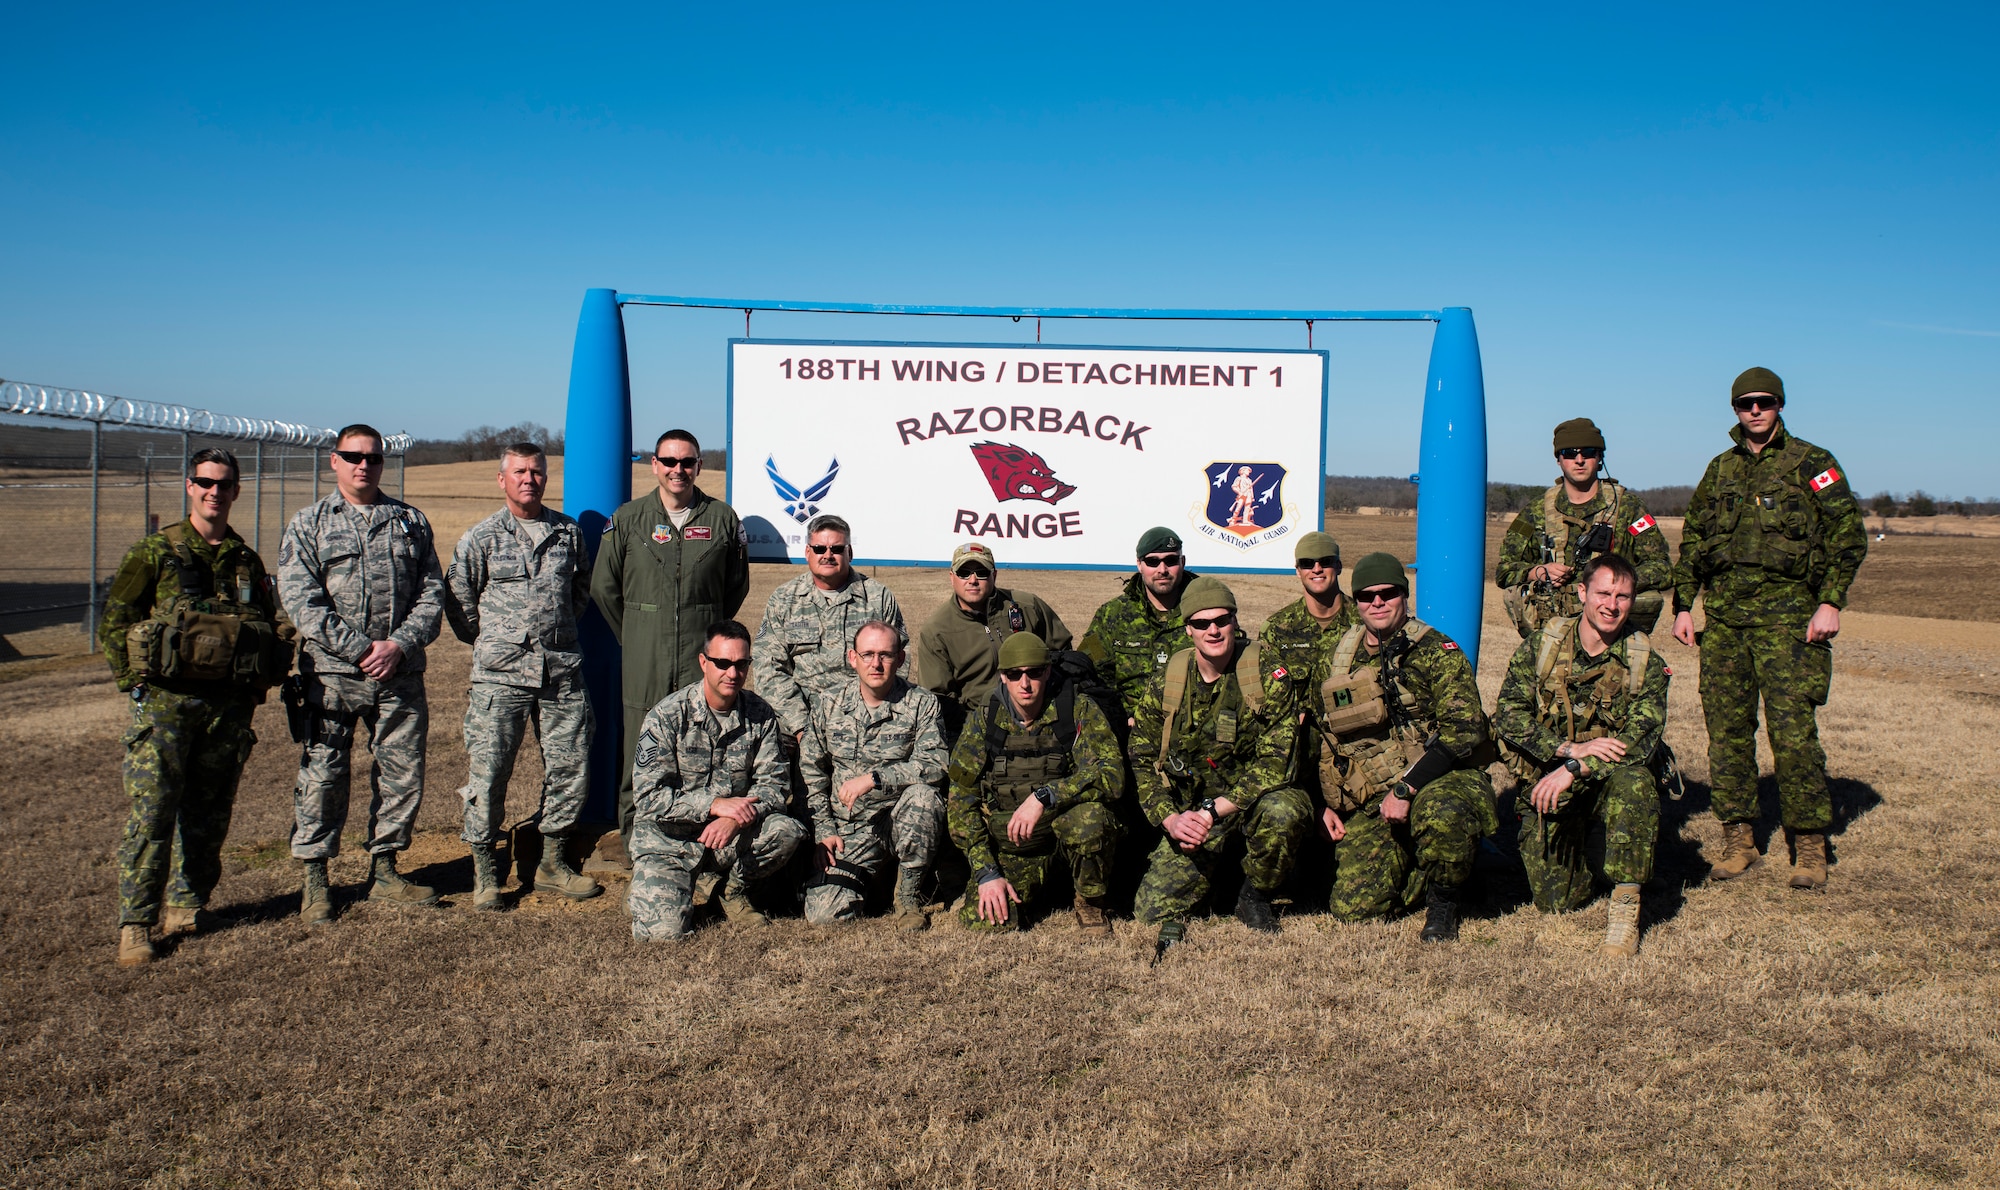 Airmen of the 188th Wing and members of the 2nd Regiment Royal Canadian Horse Artillery gather together as a group Feb. 10, 2016, during training held at Razorback Range, Fort Chaffee Joint Maneuver Training Center, Fort Smith, Ark. Canadian JTACs are required to train abroad at least twice a year and chose to come to Razorback Range to benefit from the wealth of training opportunities provided there. (U.S. Air National Guard photo by Senior Airman Cody Martin/Released) 